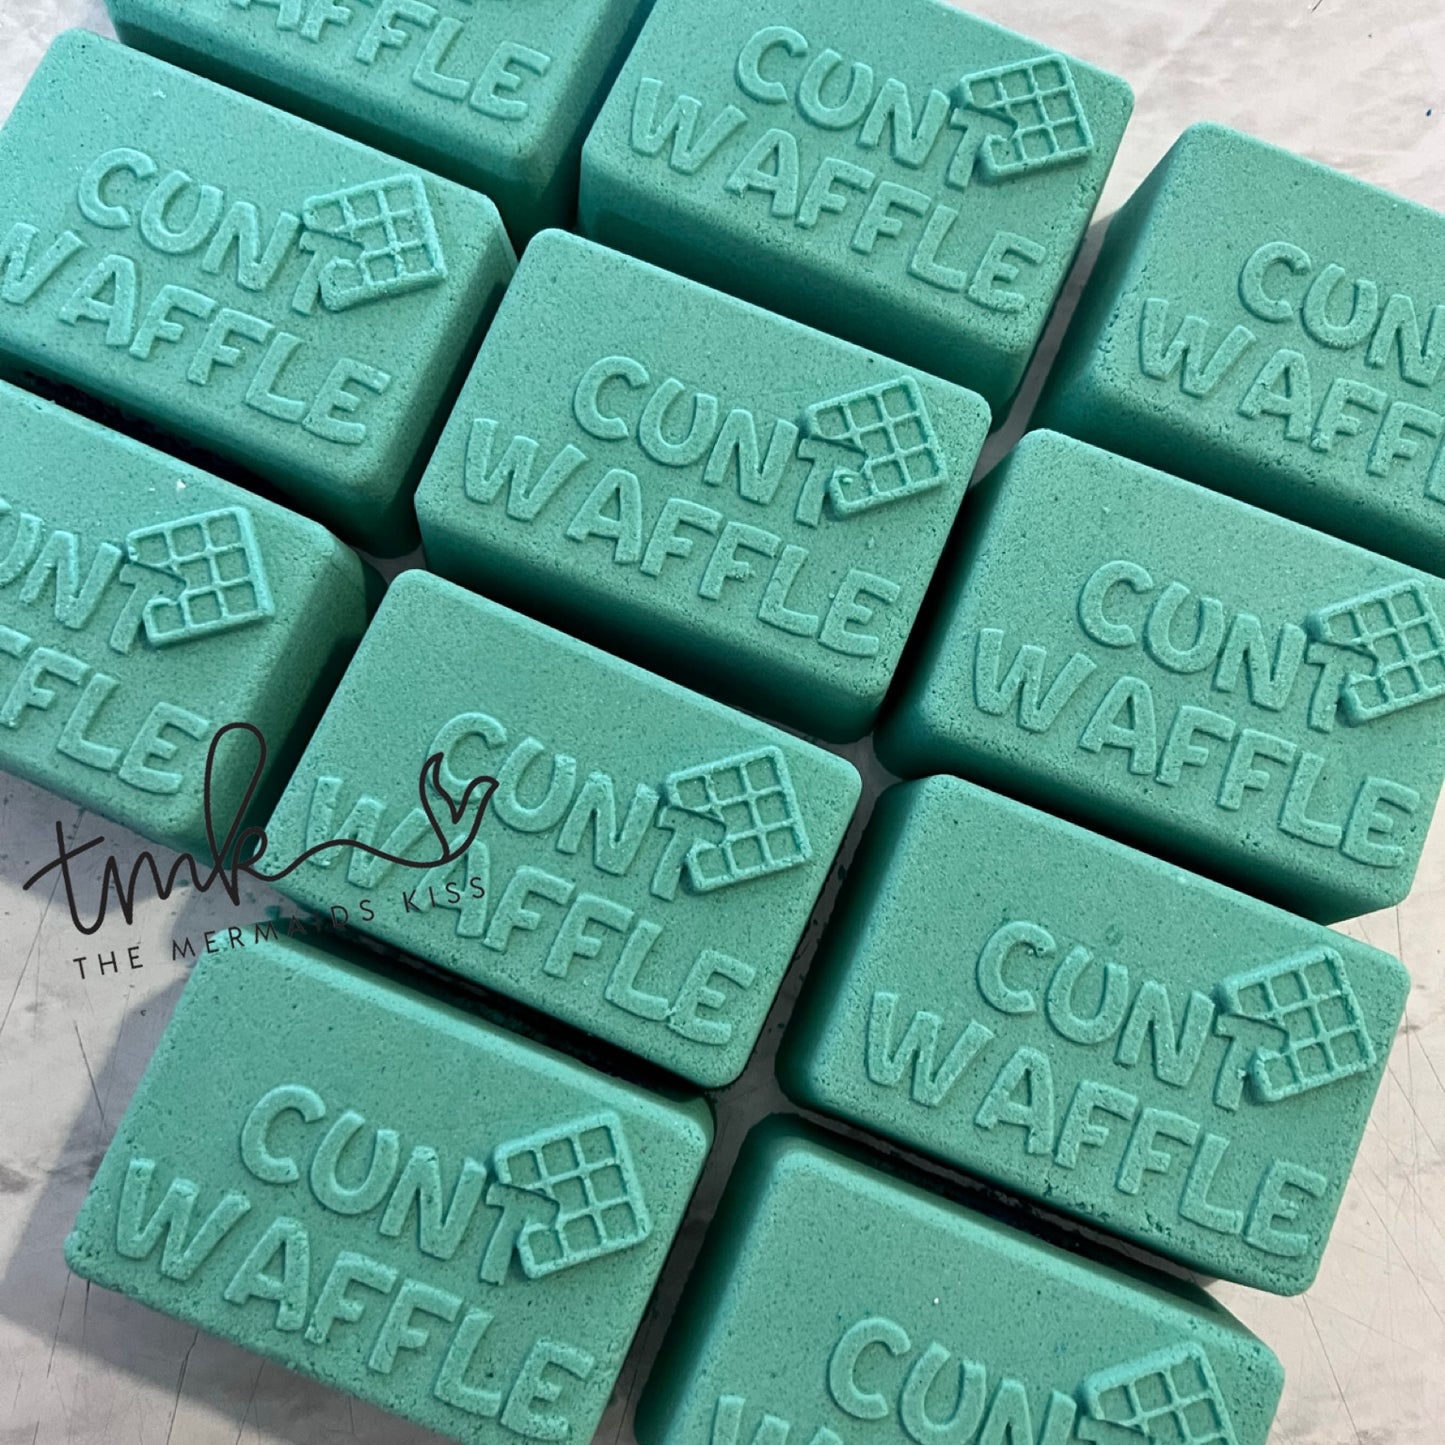 Naughty Word Cubes 3D Printed